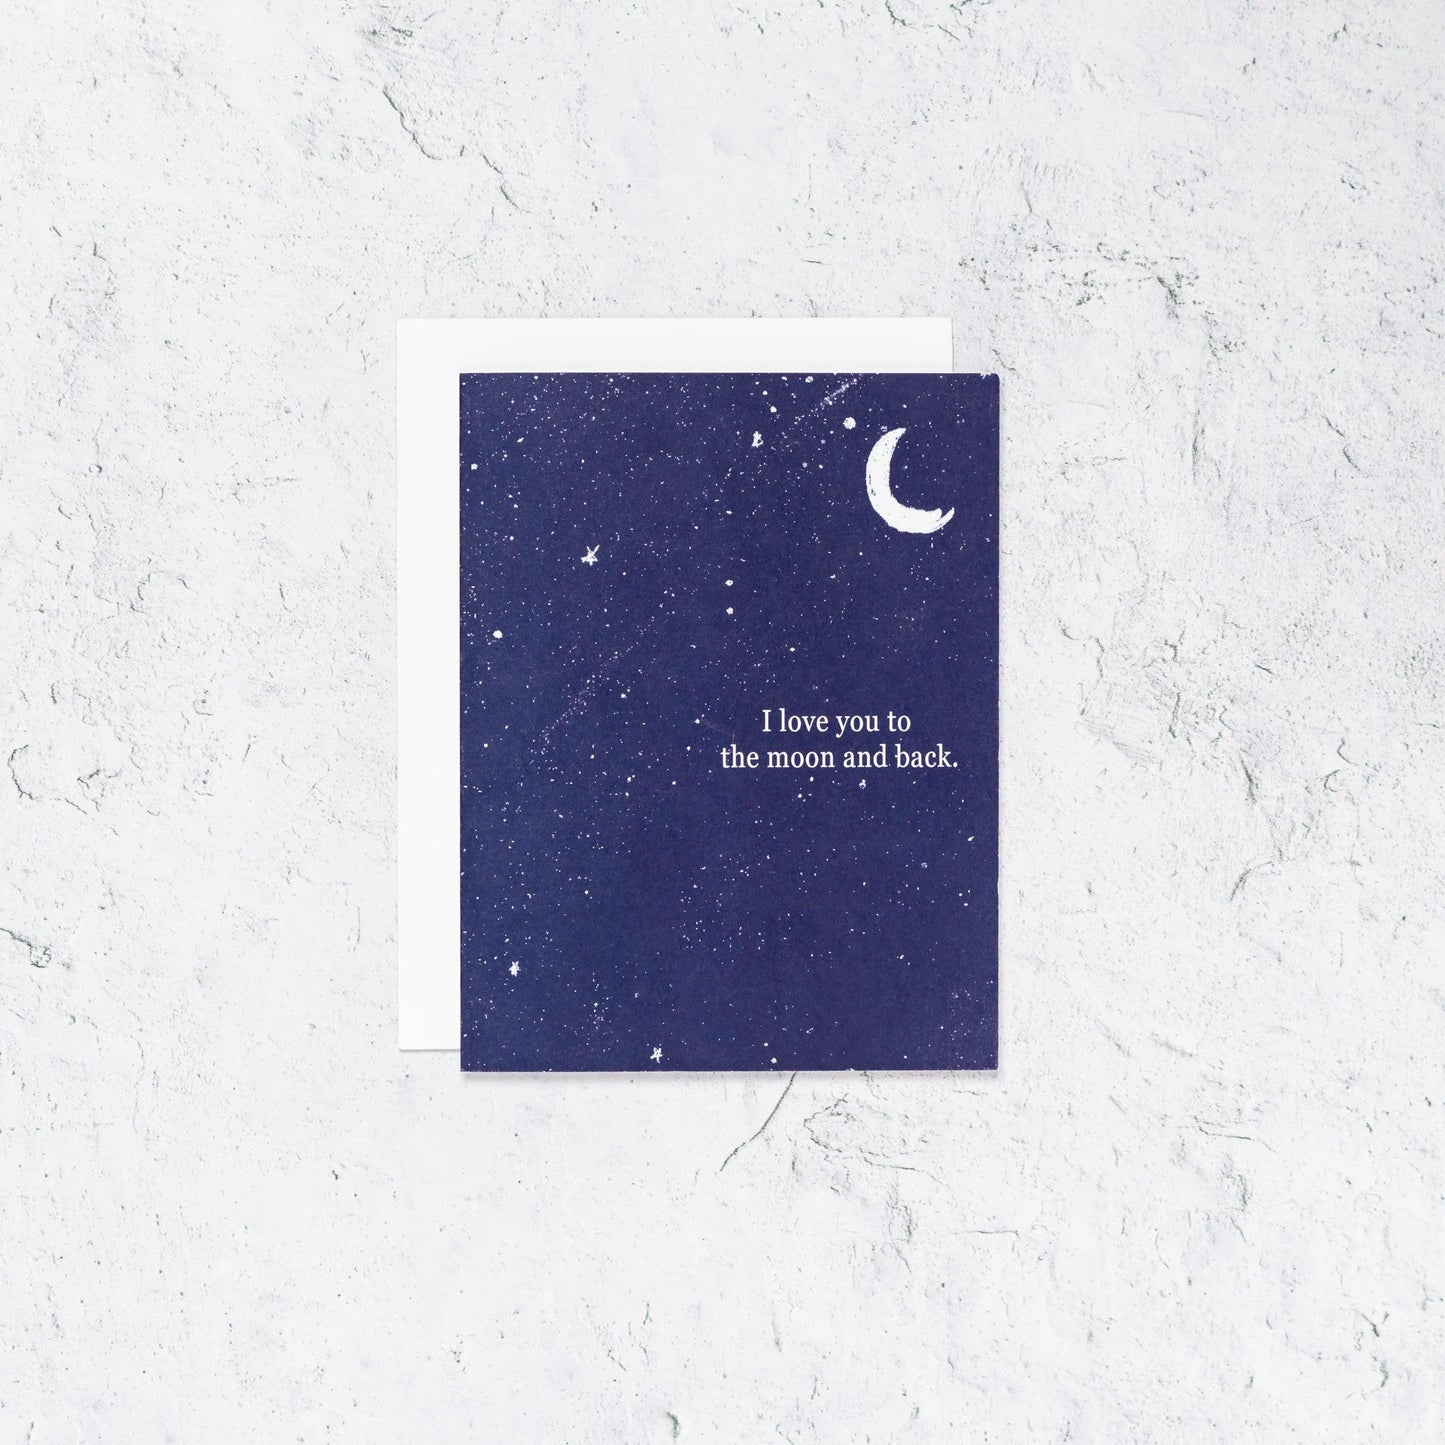 Love To the Moon and Back Letterpress Card  Edit alt text